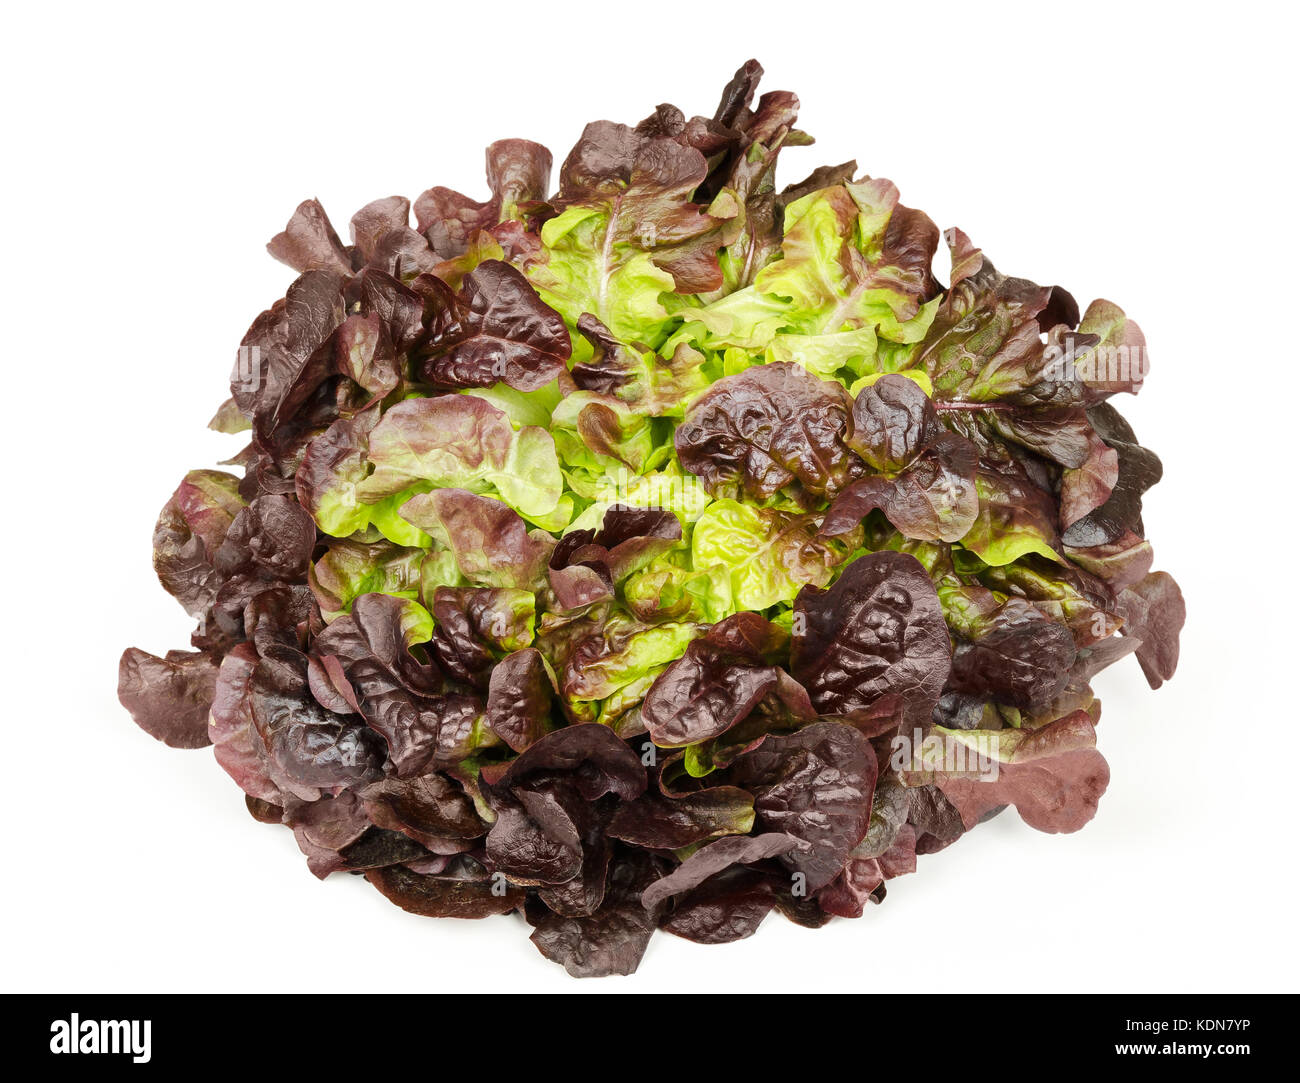 Red oak leaf lettuce front view isolated over white. Also called oakleaf, a variety of Lactuca sativa. Red butter lettuce with distinctly lobed leaves Stock Photo